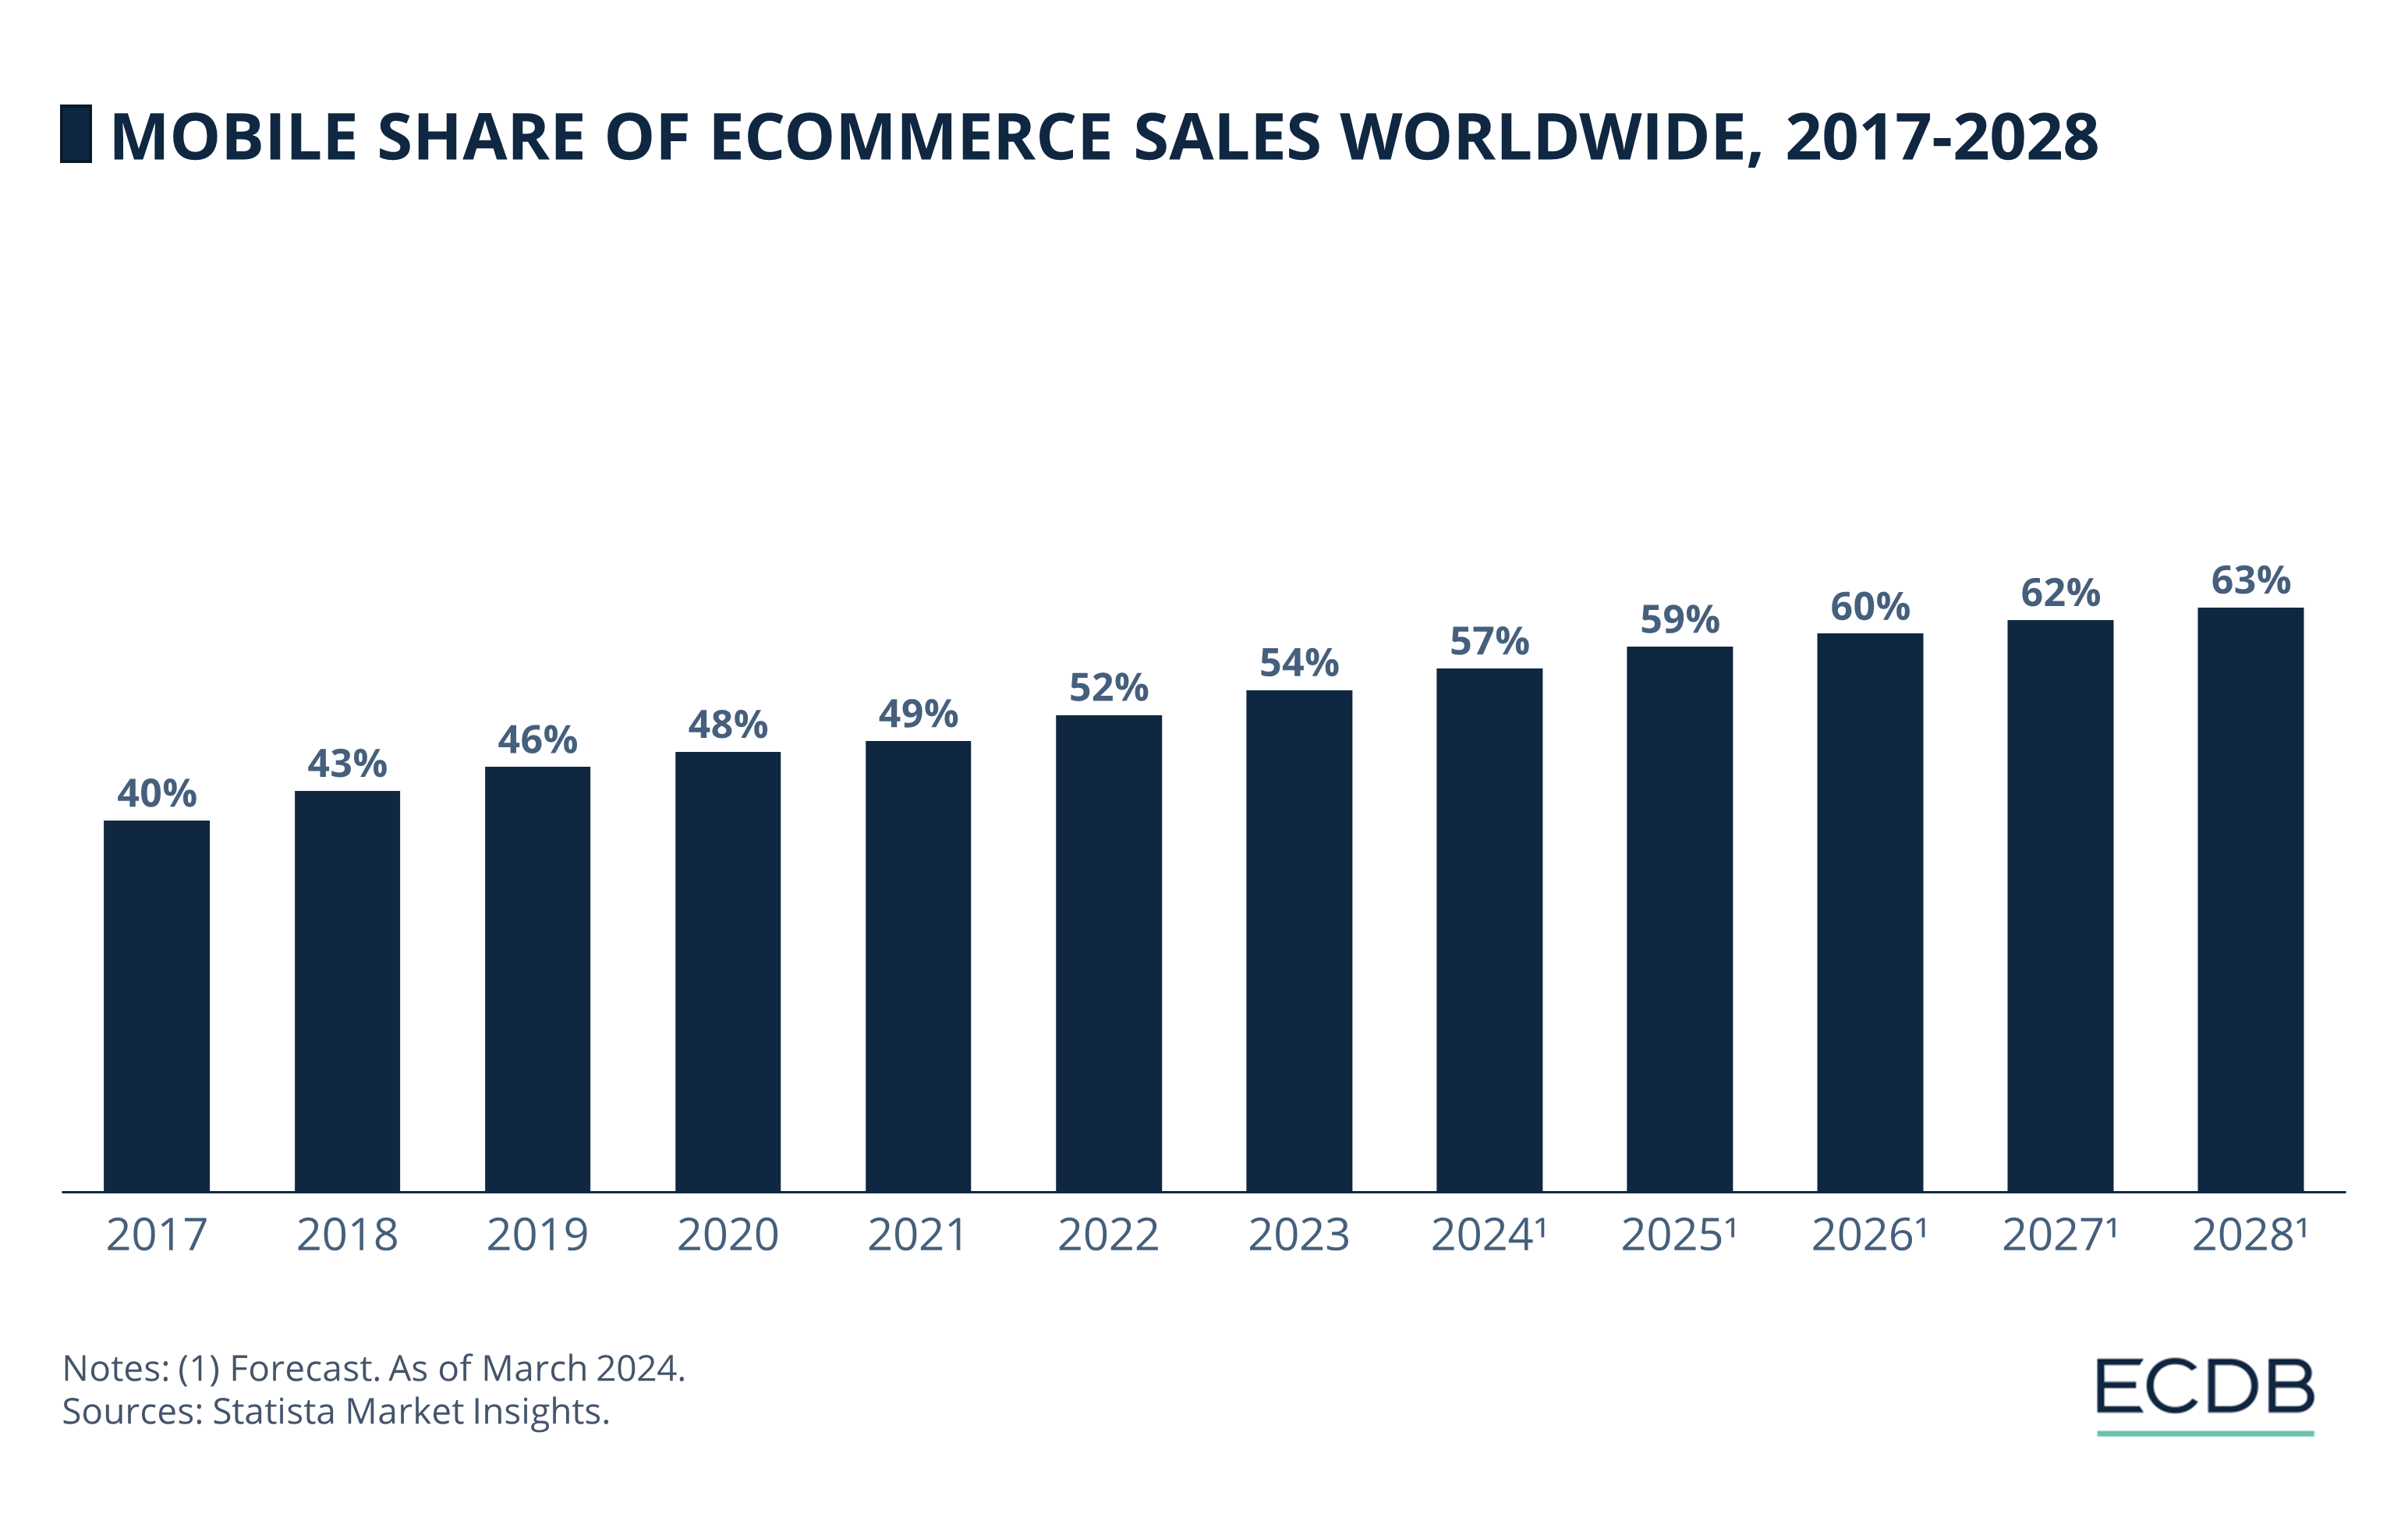 Mobile Share of eCommerce Sales Worldwide, 2017-2028